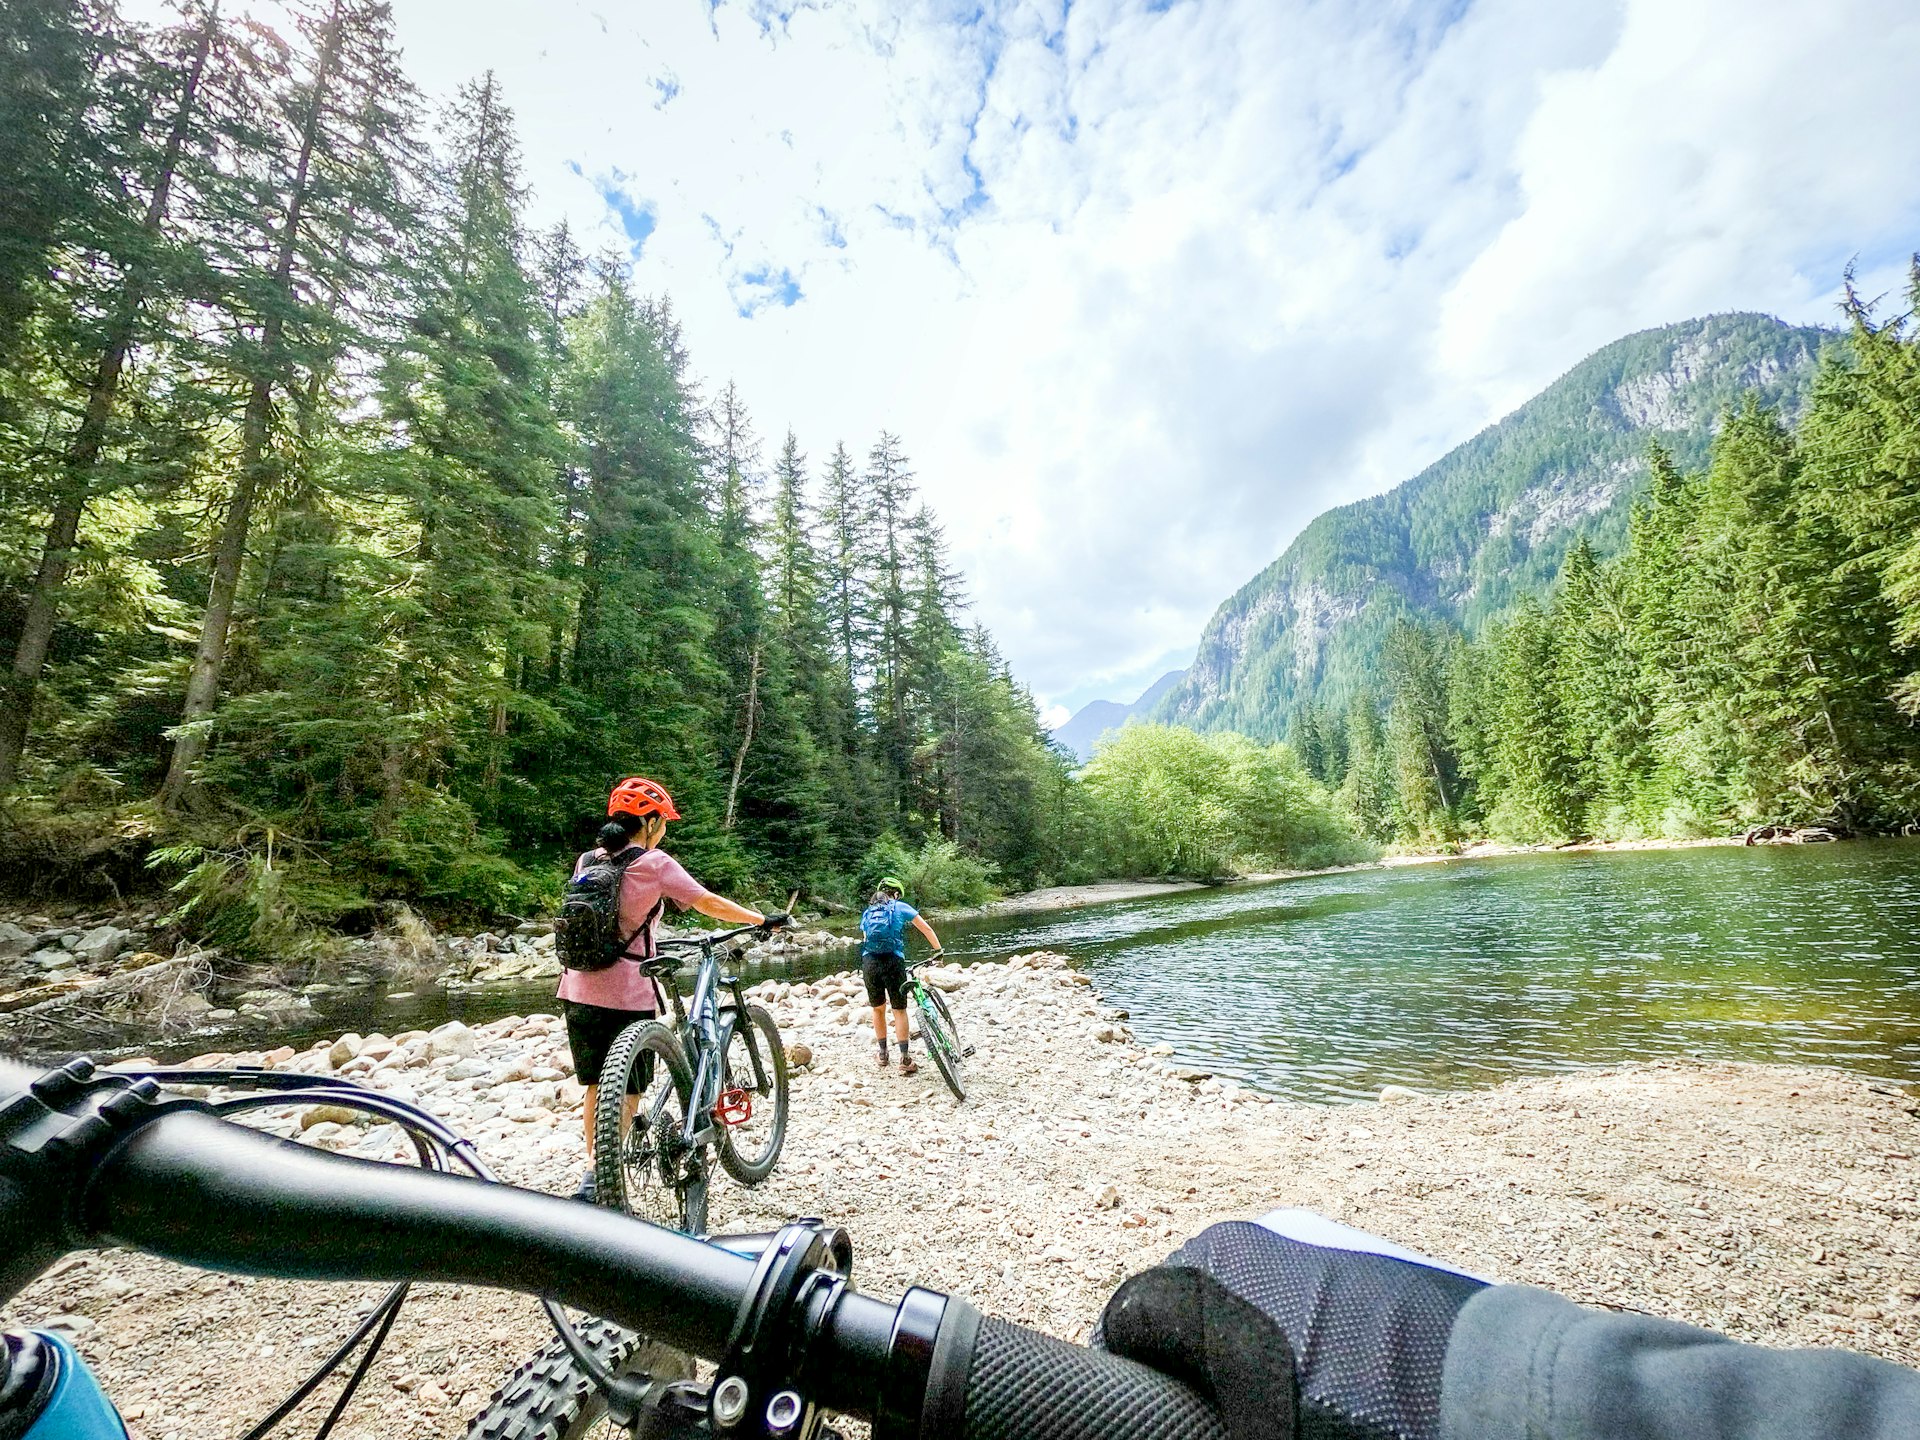 A family on their bicycles beside a rocky stream near the Seymour River, North Vancouver, British Columbia, Canada